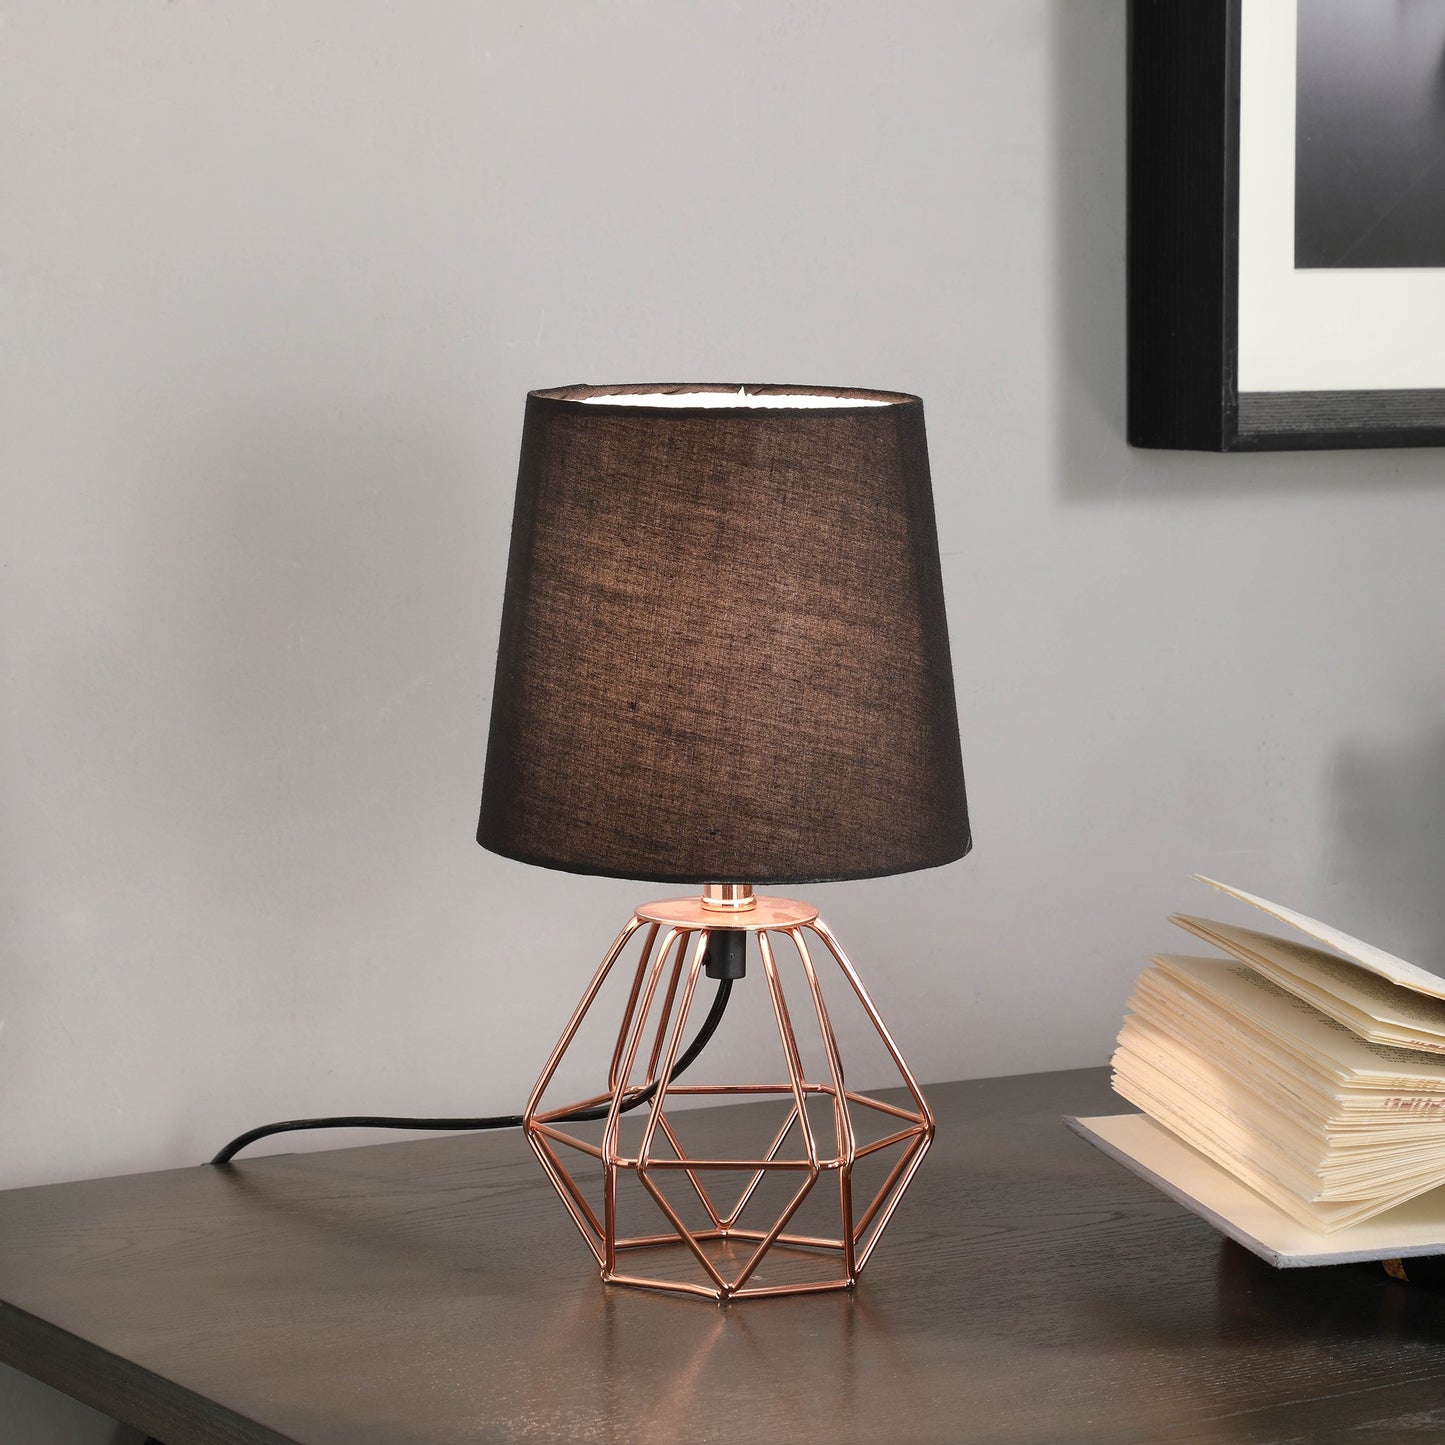 11" Copper Bedside Table Lamp With Black Empire Shade